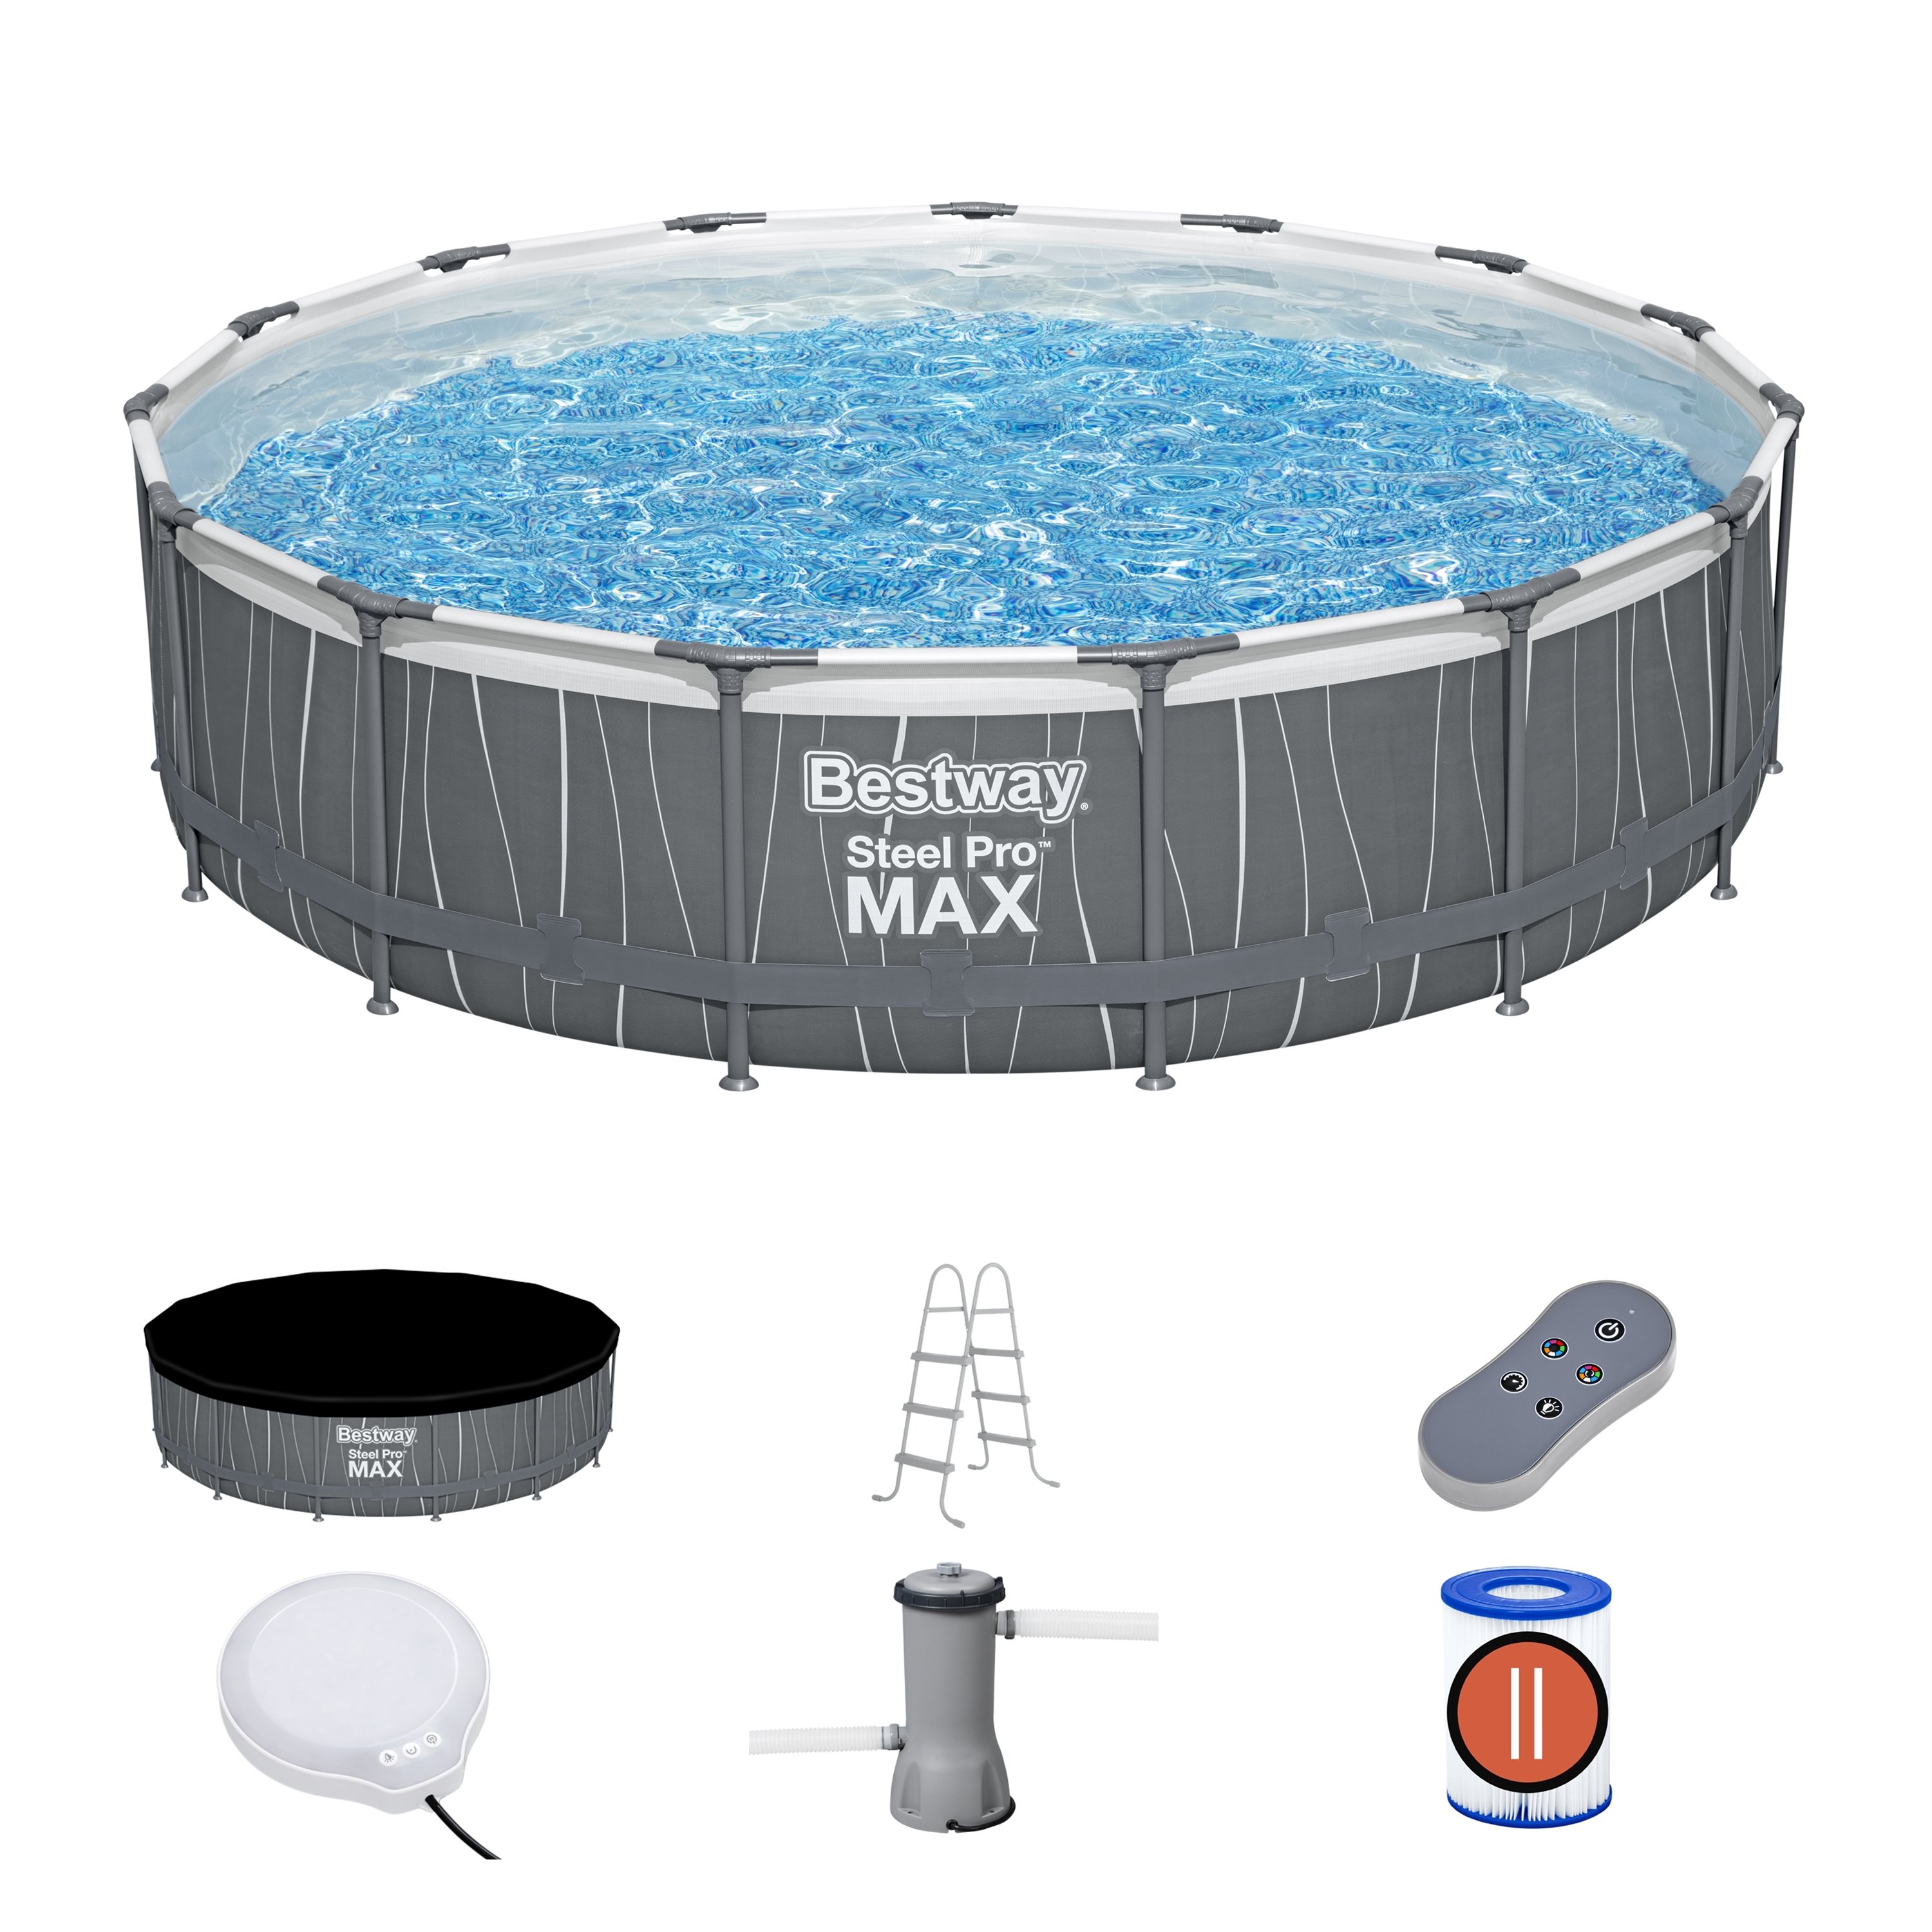 Bestway® Steel Pro MAX 15' x 42" Round Above Ground Pool Set with LED Light - 561GBE